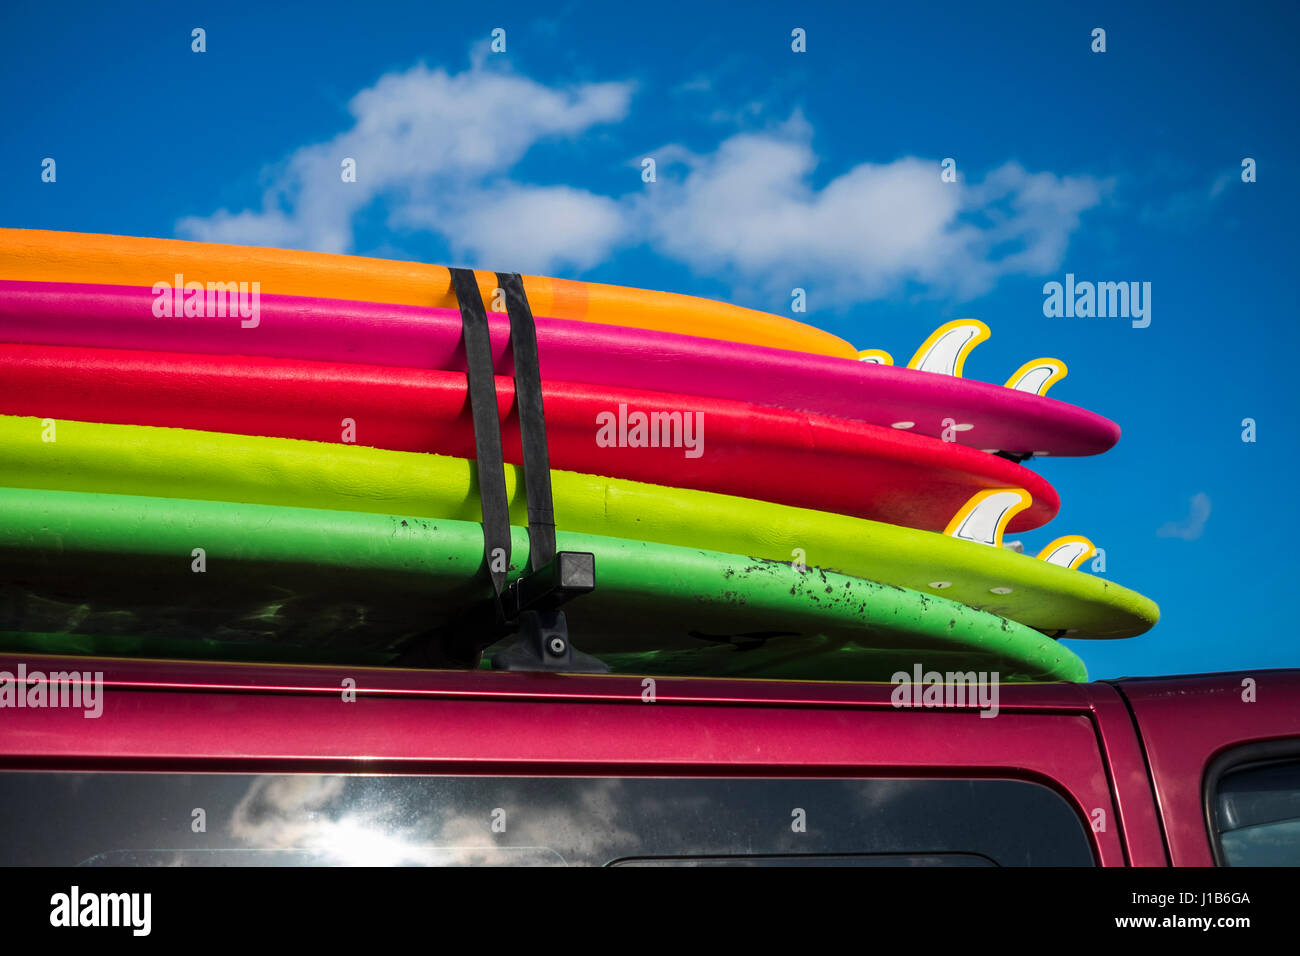 Multicolor surfboards strapped to roof of car Stock Photo